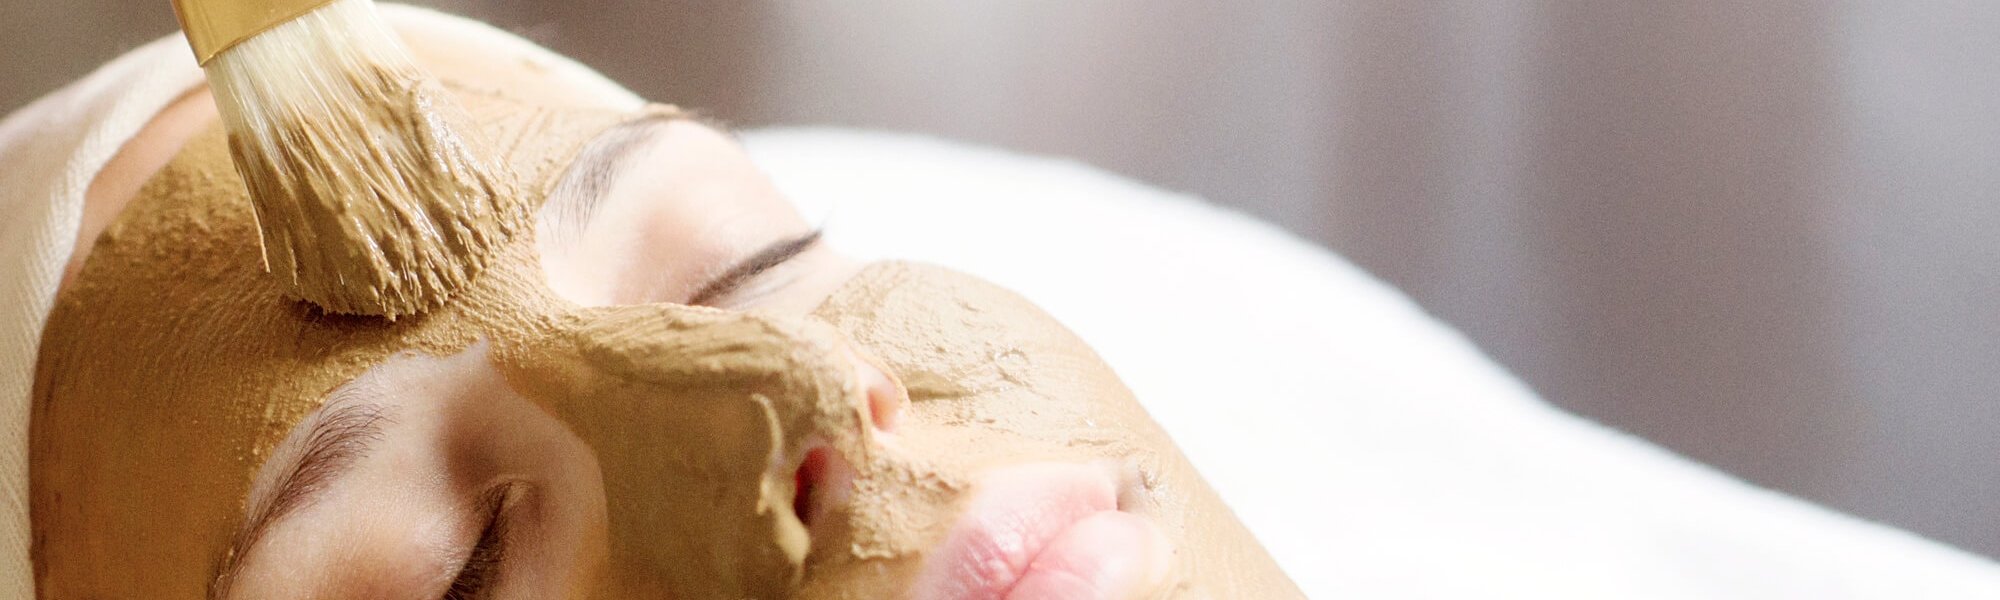 Give Your Skin Some Love This Sunday Article